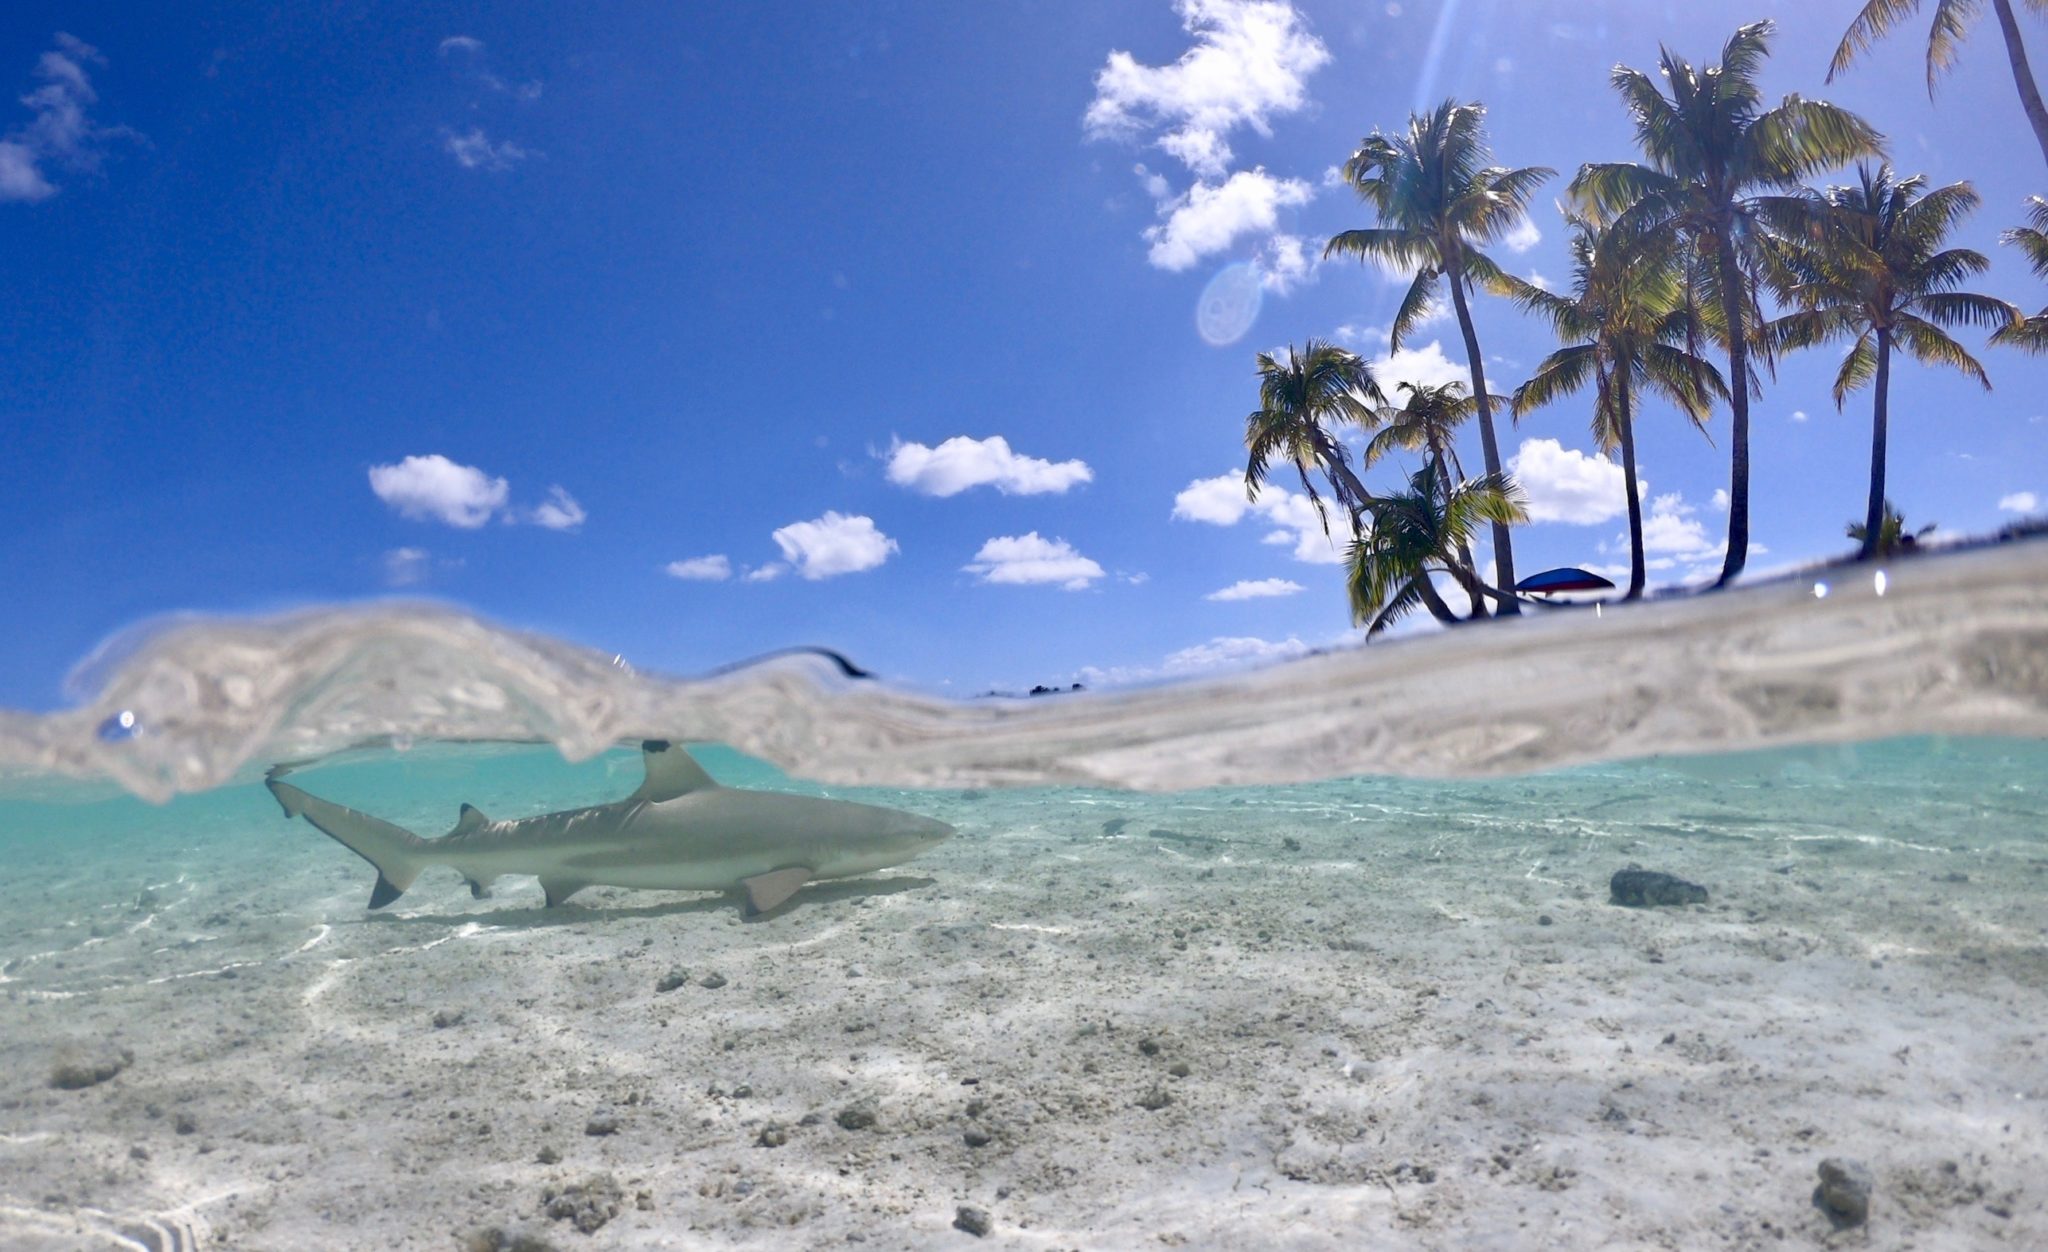 A split shot showing palm trees above water and a shark below